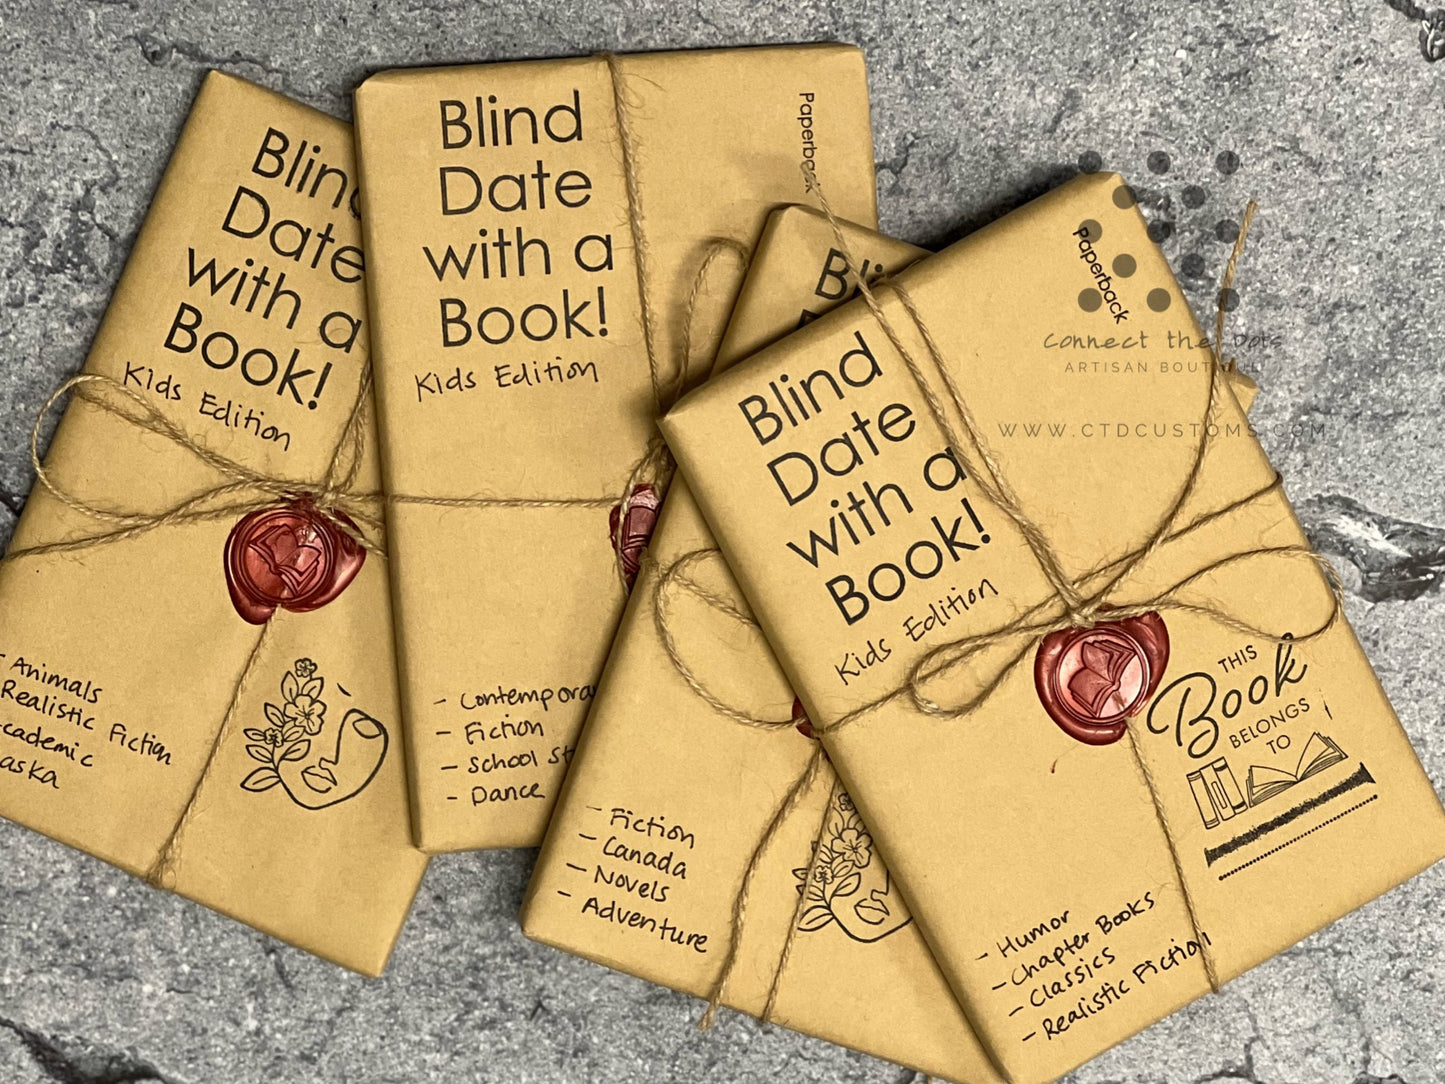 Blind Date with a Book - kids edition